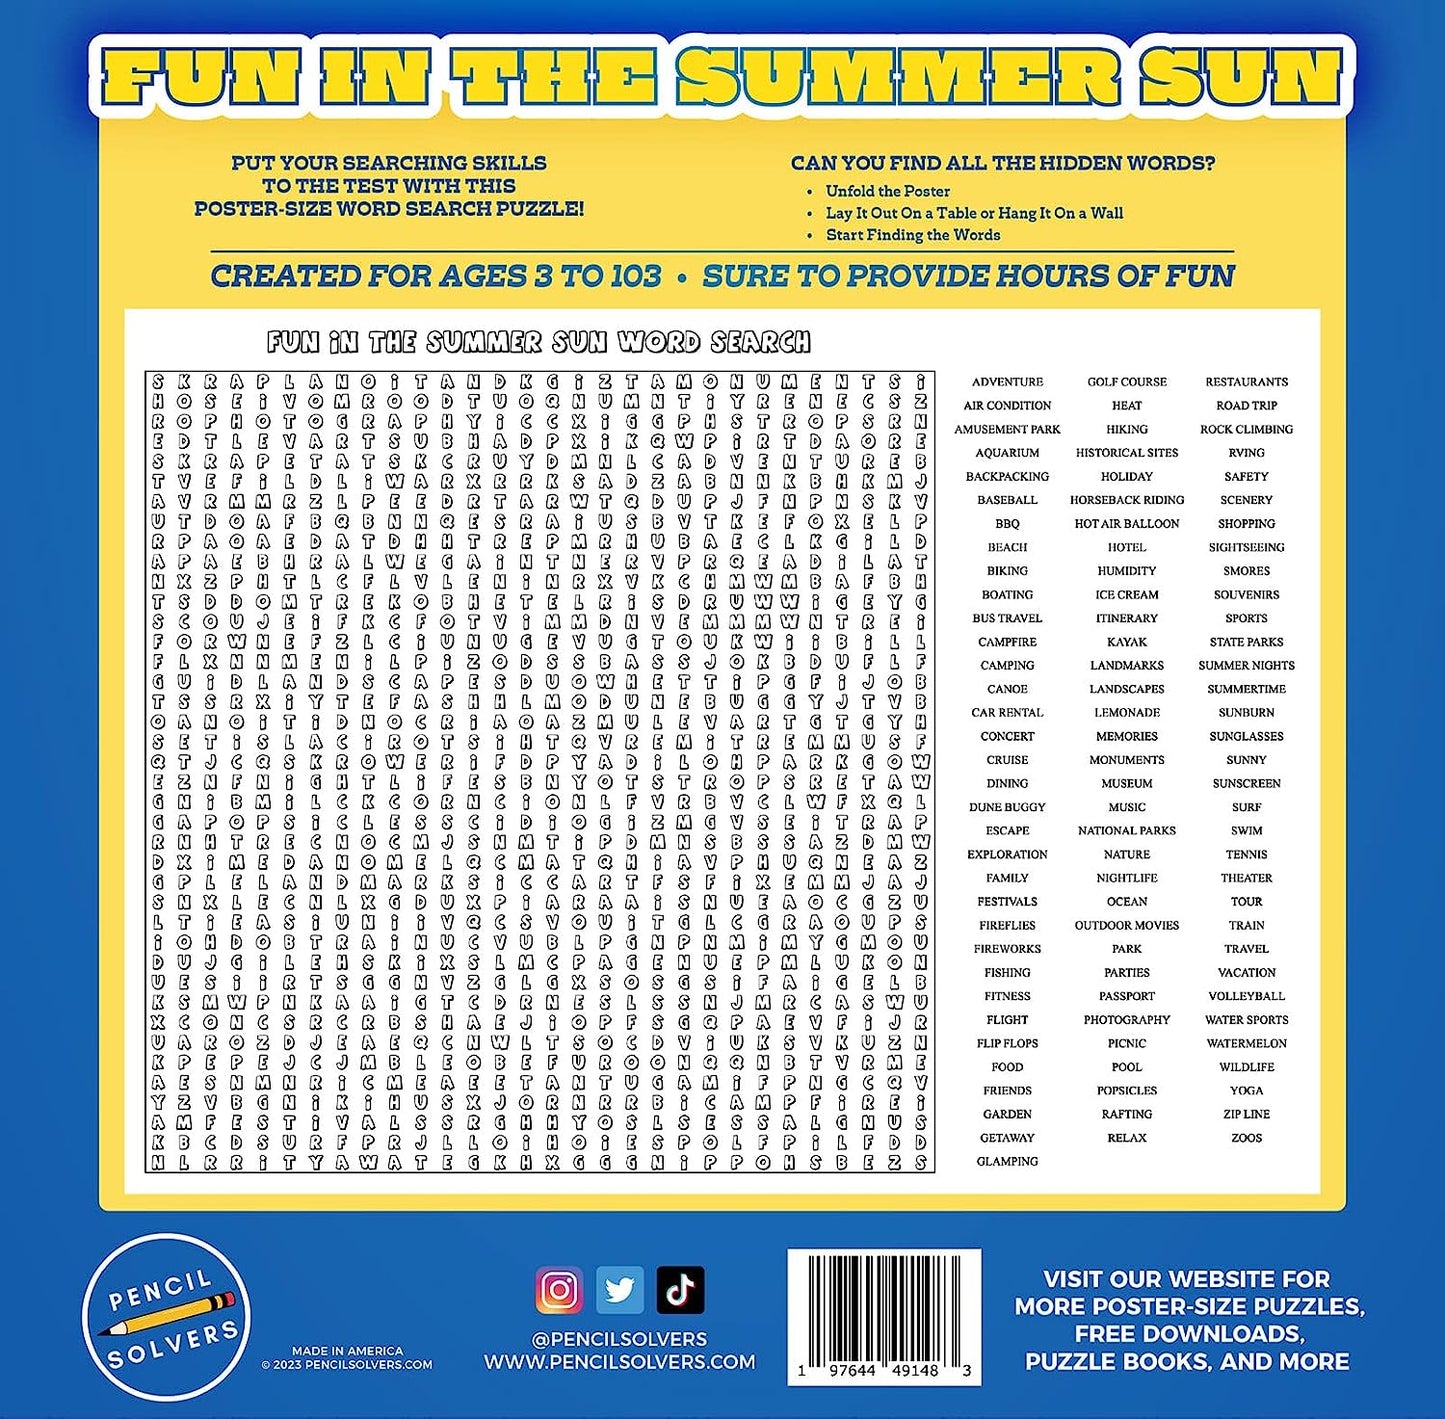 Poster-Size Word Search - Fun in The Summer Sun - 100 Words to Find On This Giant Word Search Puzzle